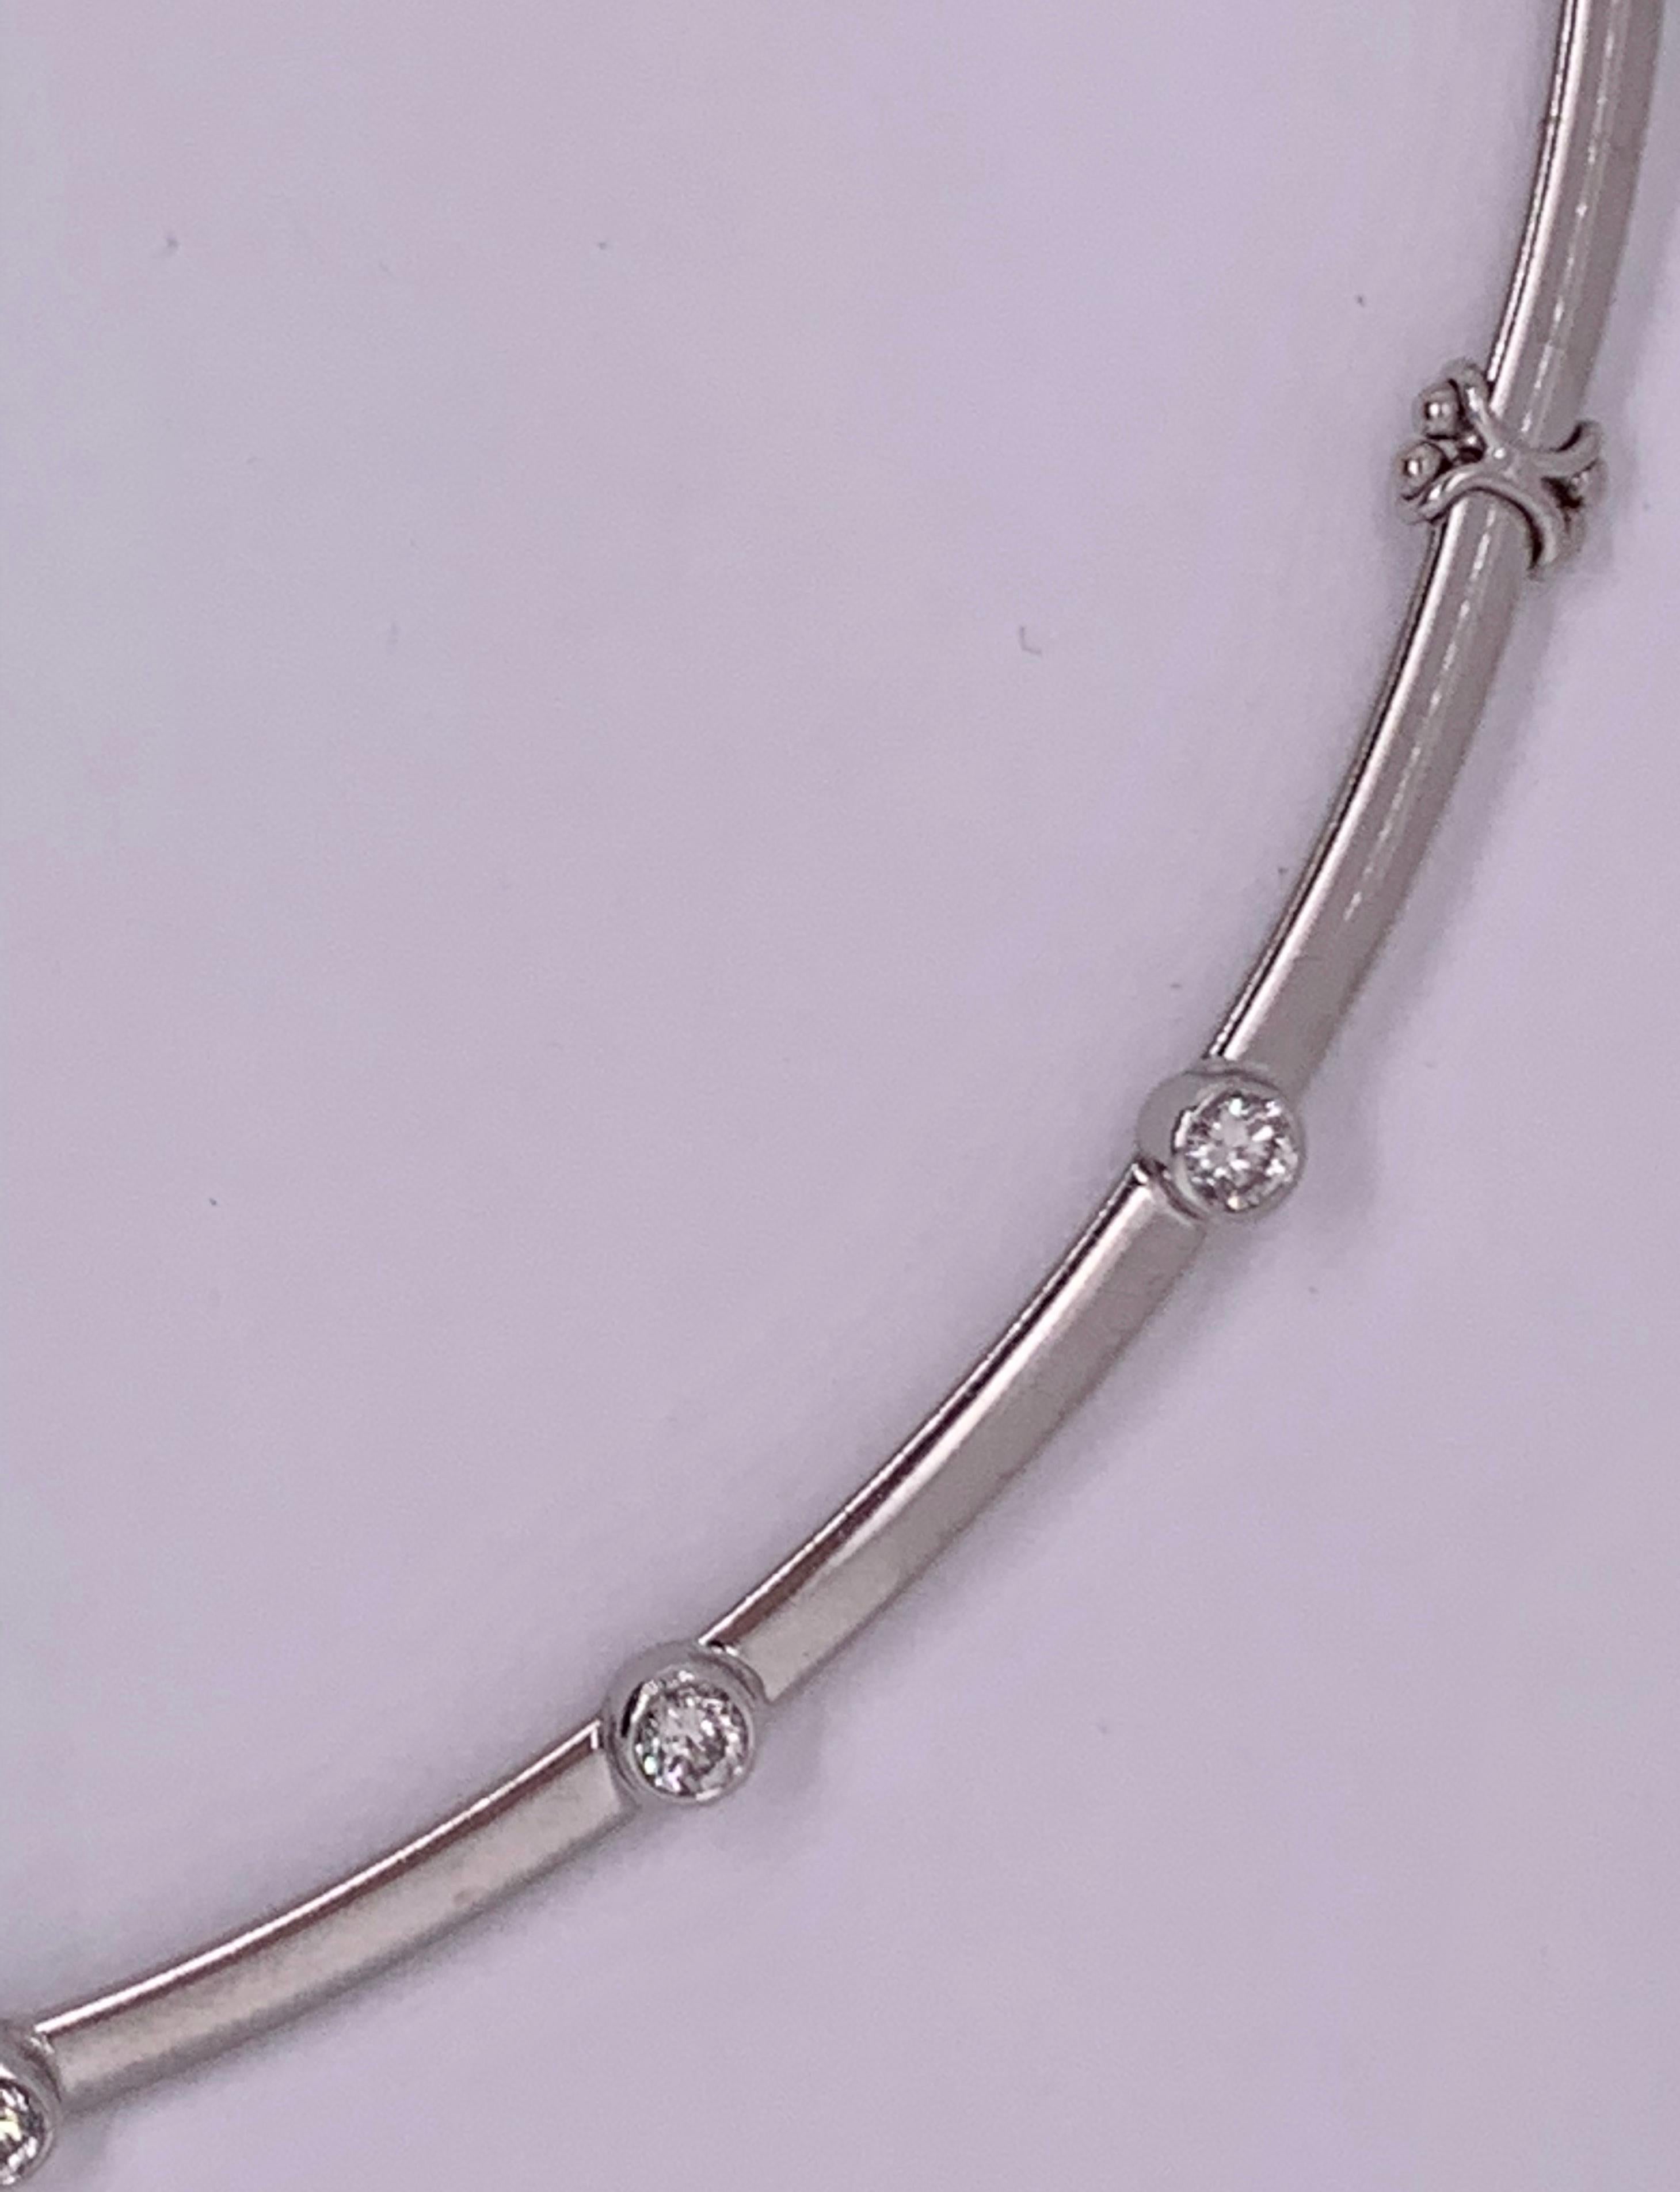 18 Kt White Gold Necklace with 1 Kt Diamonds 16.19 Grams Total Weight 18 inches. Italy